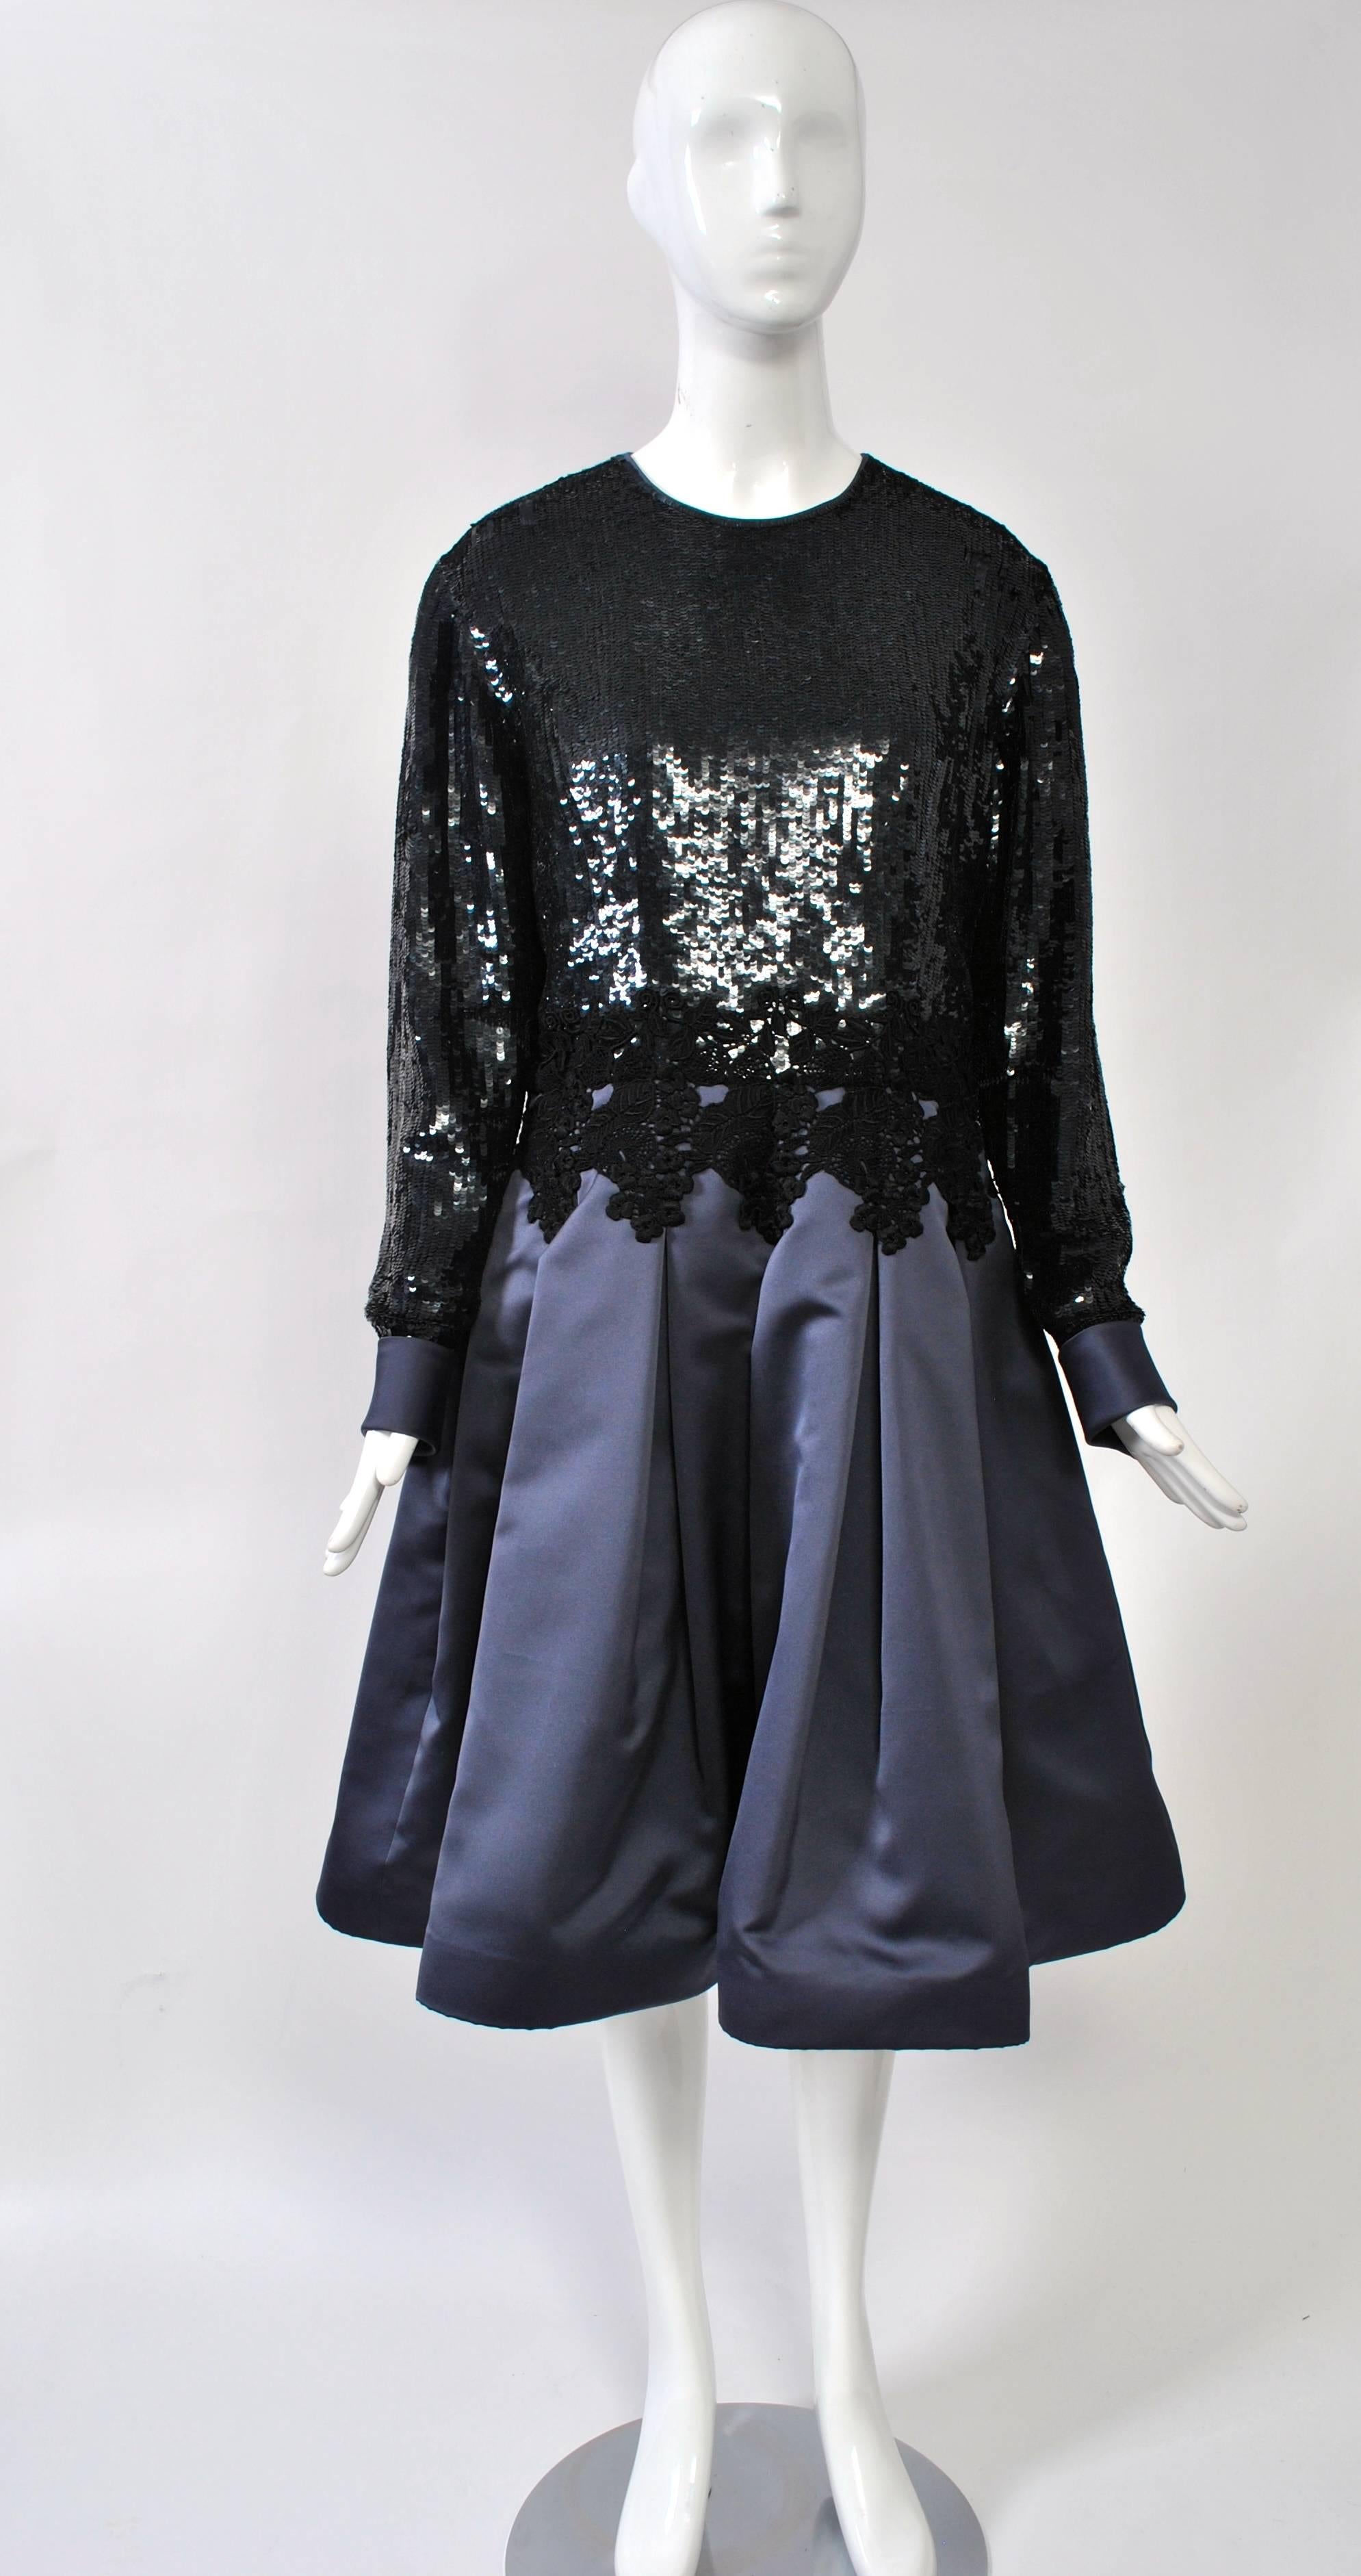 Cocktail dress featuring an all-over black sequin bodice and a gunmetal satin skirt, the bodice with jewel neckline and long sleeves, the satin skirt with box pleats sewn down with a repeating embroidery appliqué below the waist. Satin cuffs with